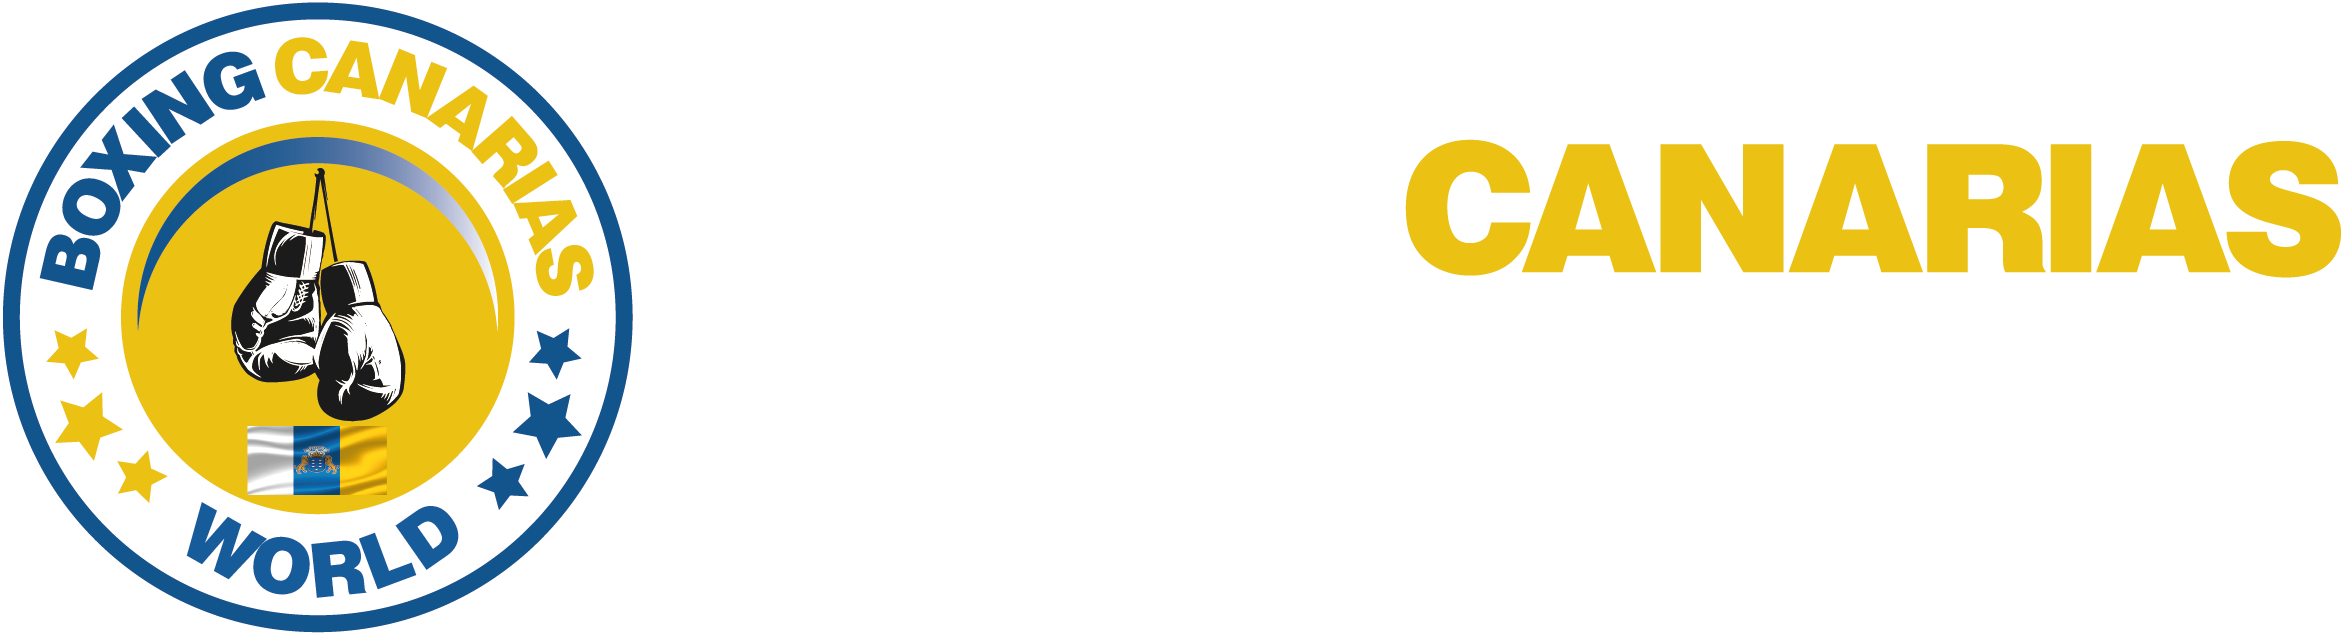 Boxing Canarias World